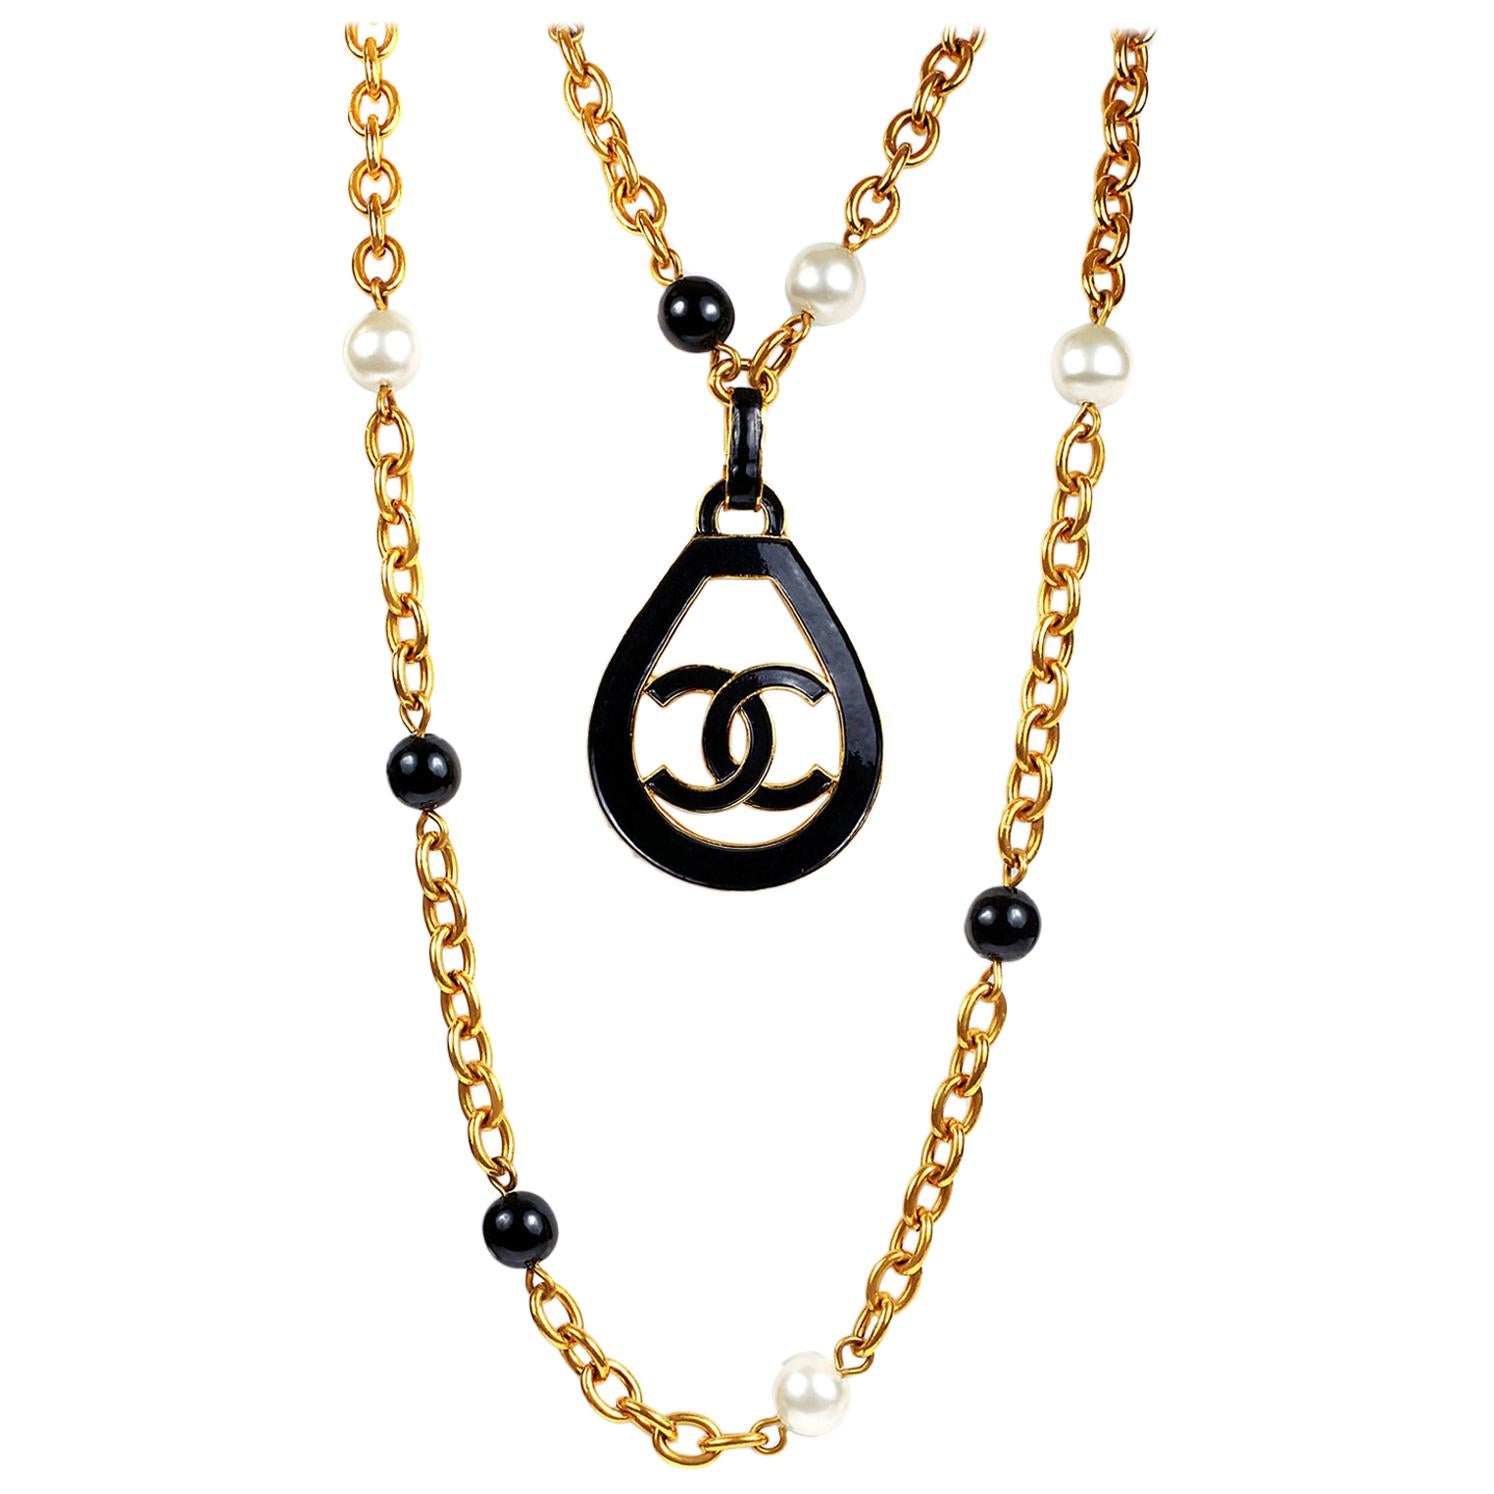 Chanel White and Black Charm CC Enamel Necklace